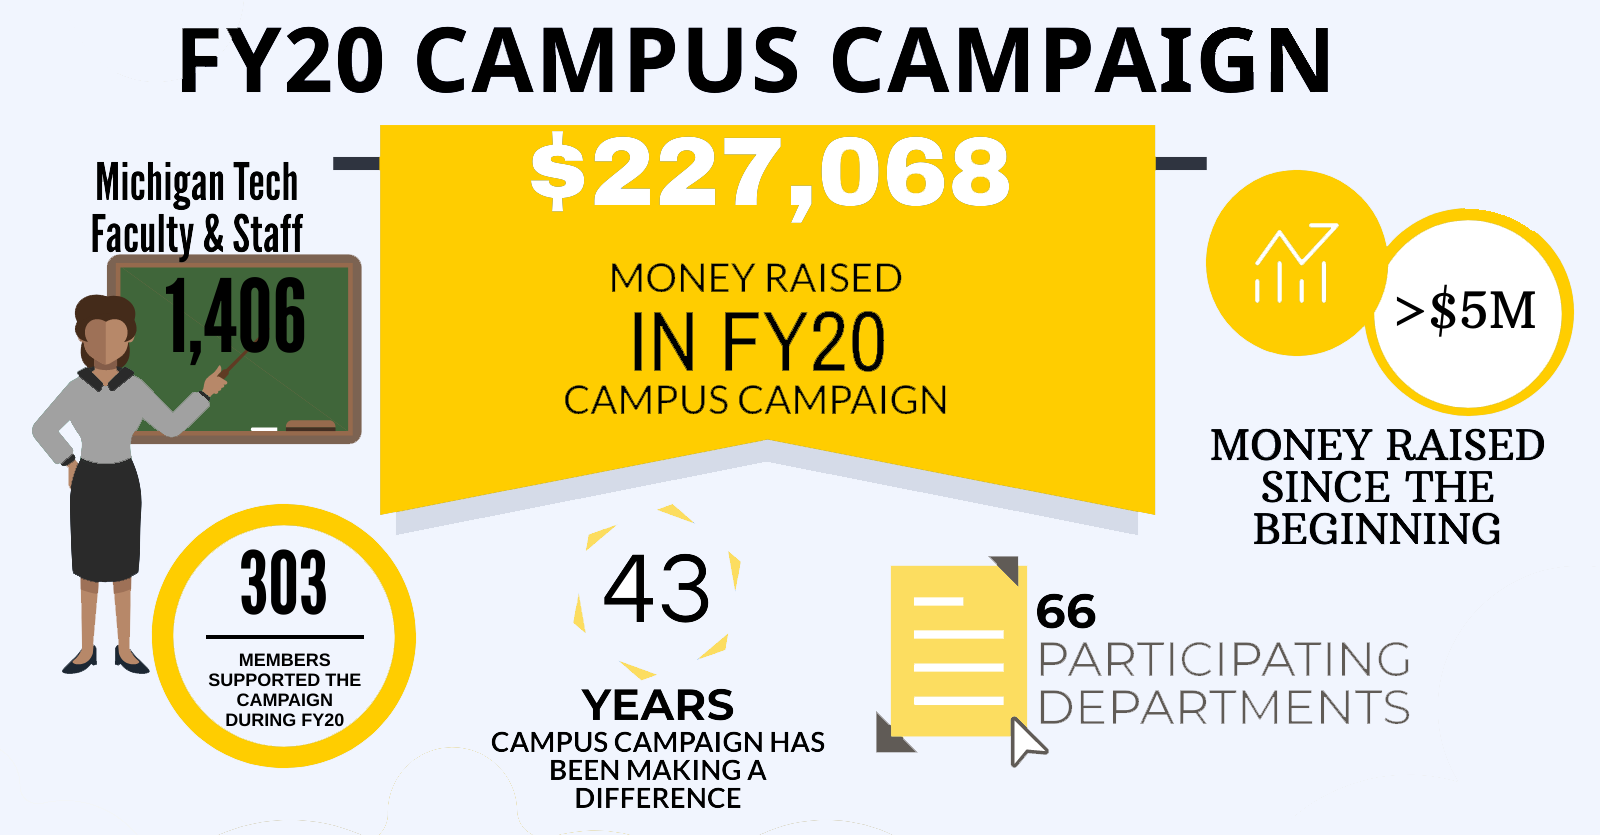 Statistics for the campus campaign